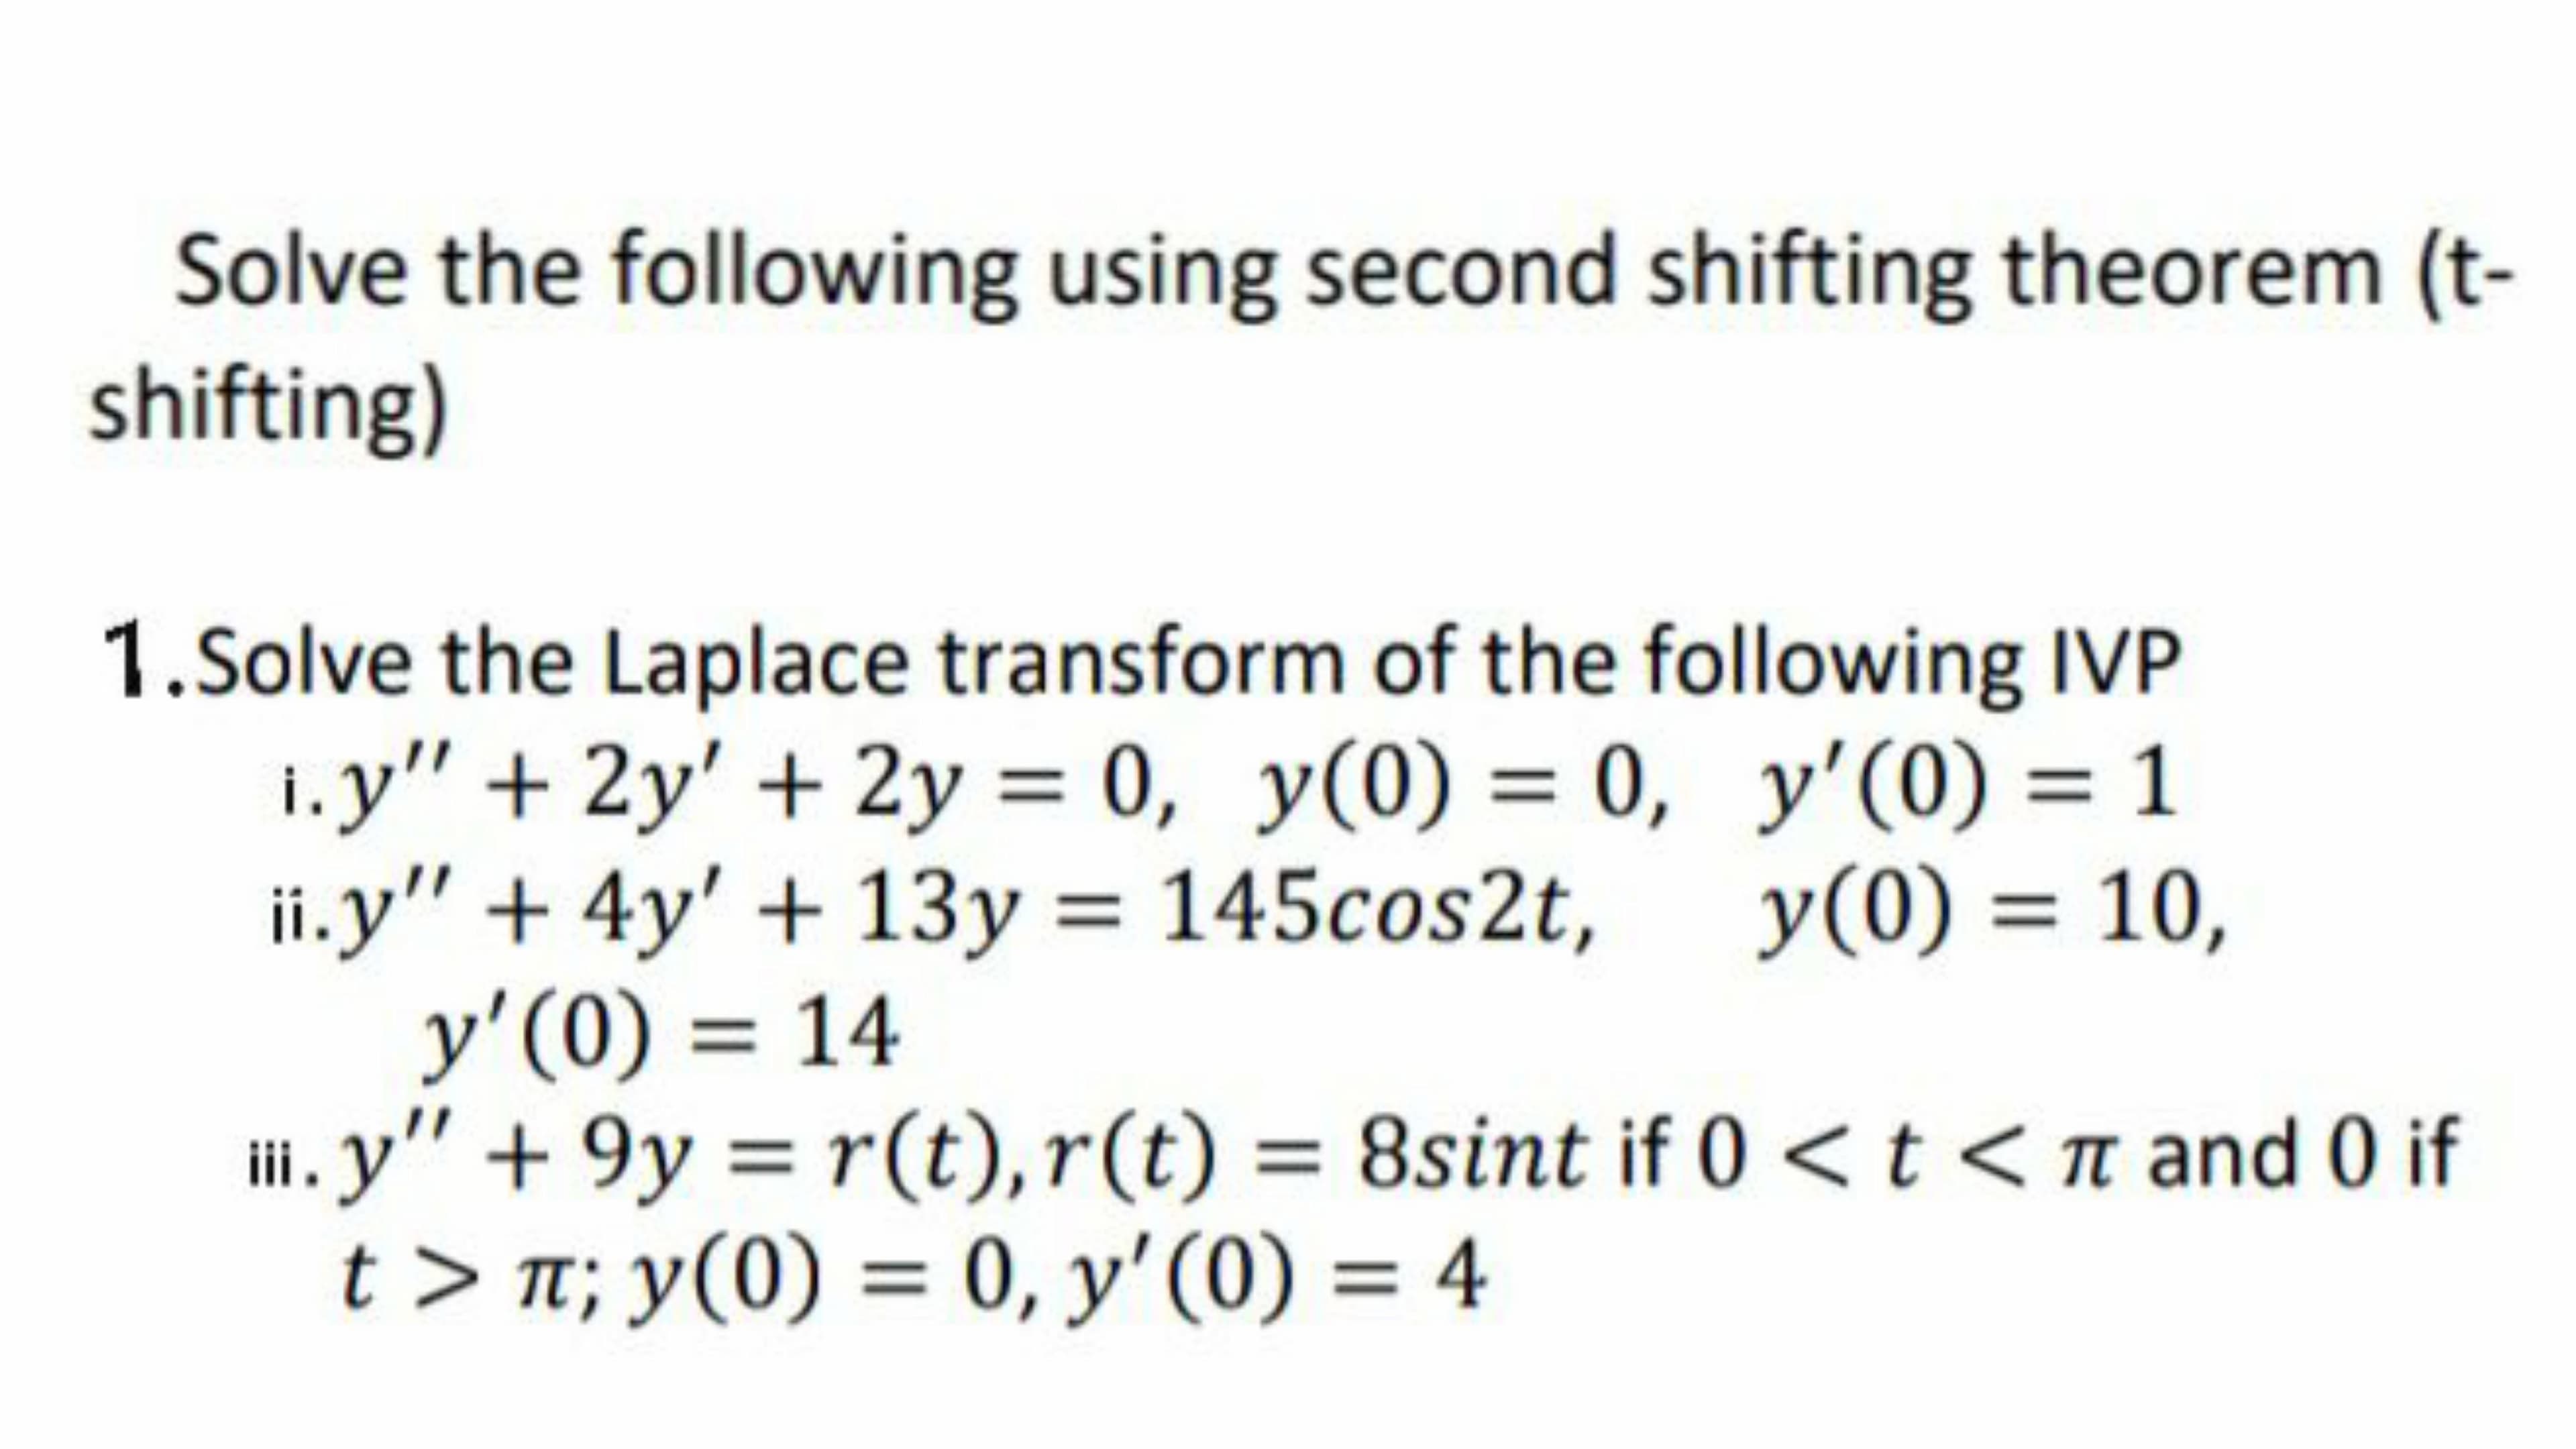 Solve the following using second shifting theorem (t-
shifting)
1.Solve the Laplace transform of the following IVP
1. y" + 2y' + 2y = 0, y(0) = 0, y'(0) = 1
%3D
%3D
